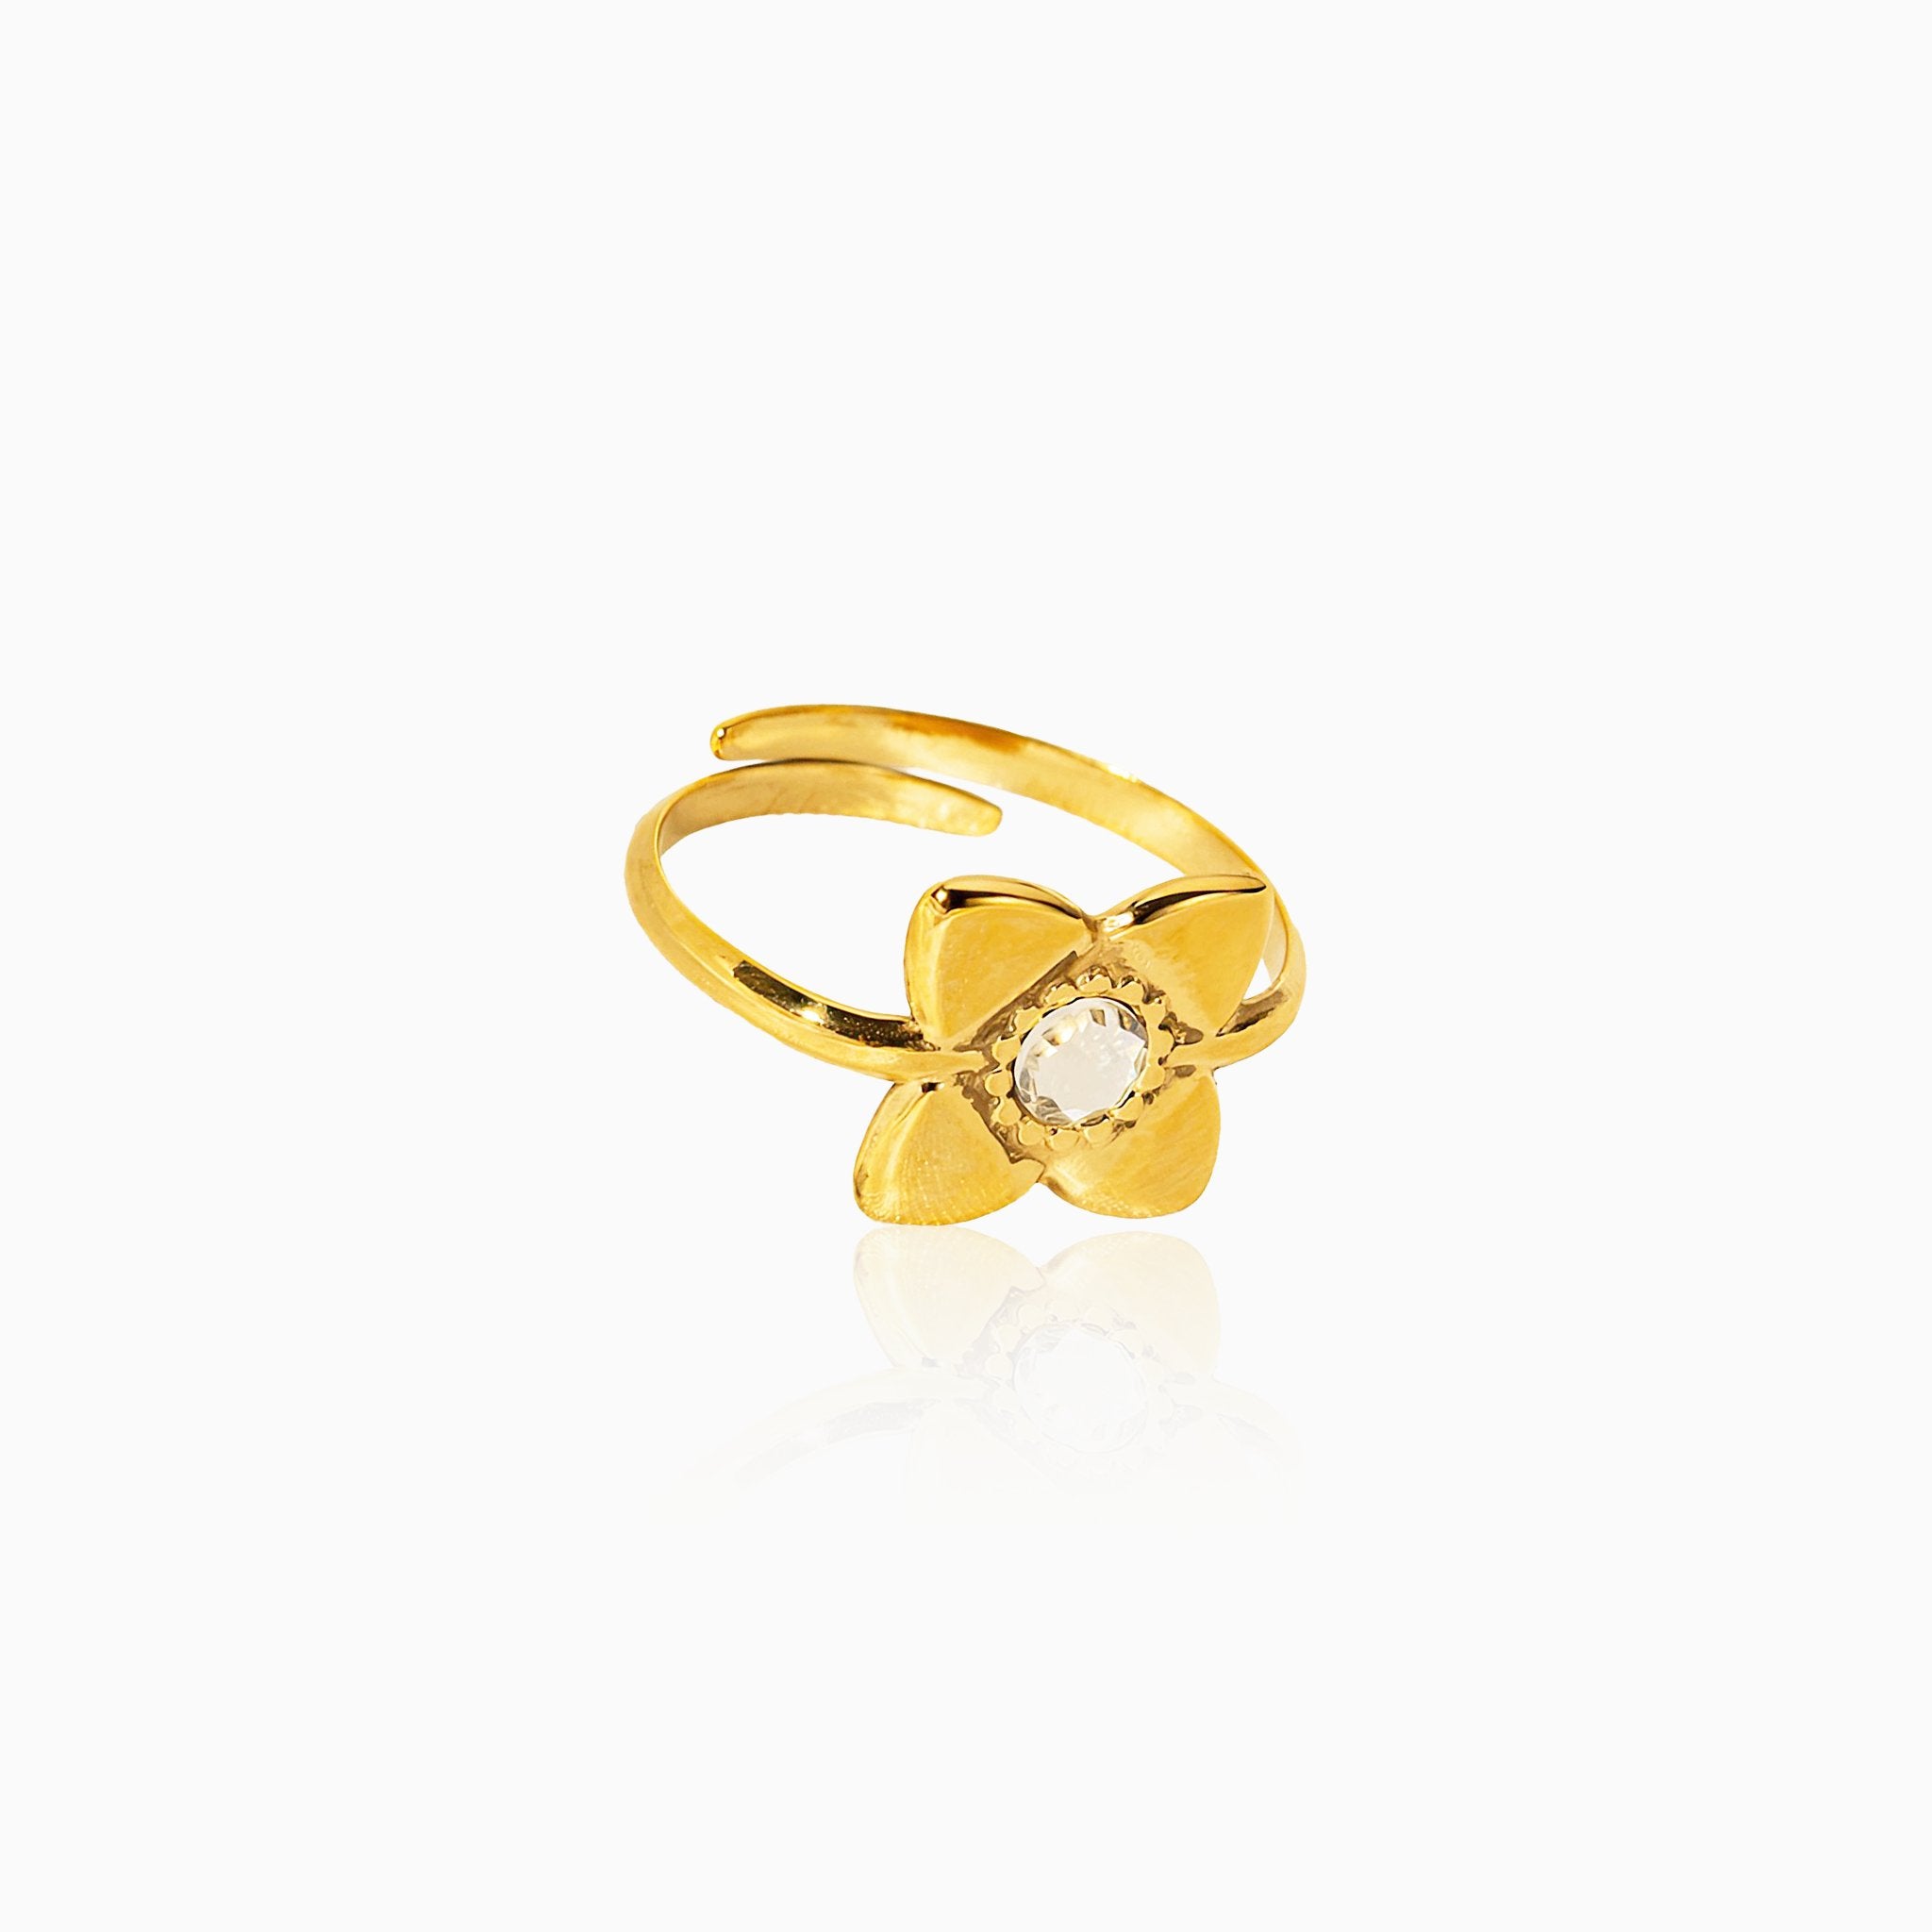 Flower Open Design Ring - Nobbier - Ring - 18K Gold And Titanium PVD Coated Jewelry